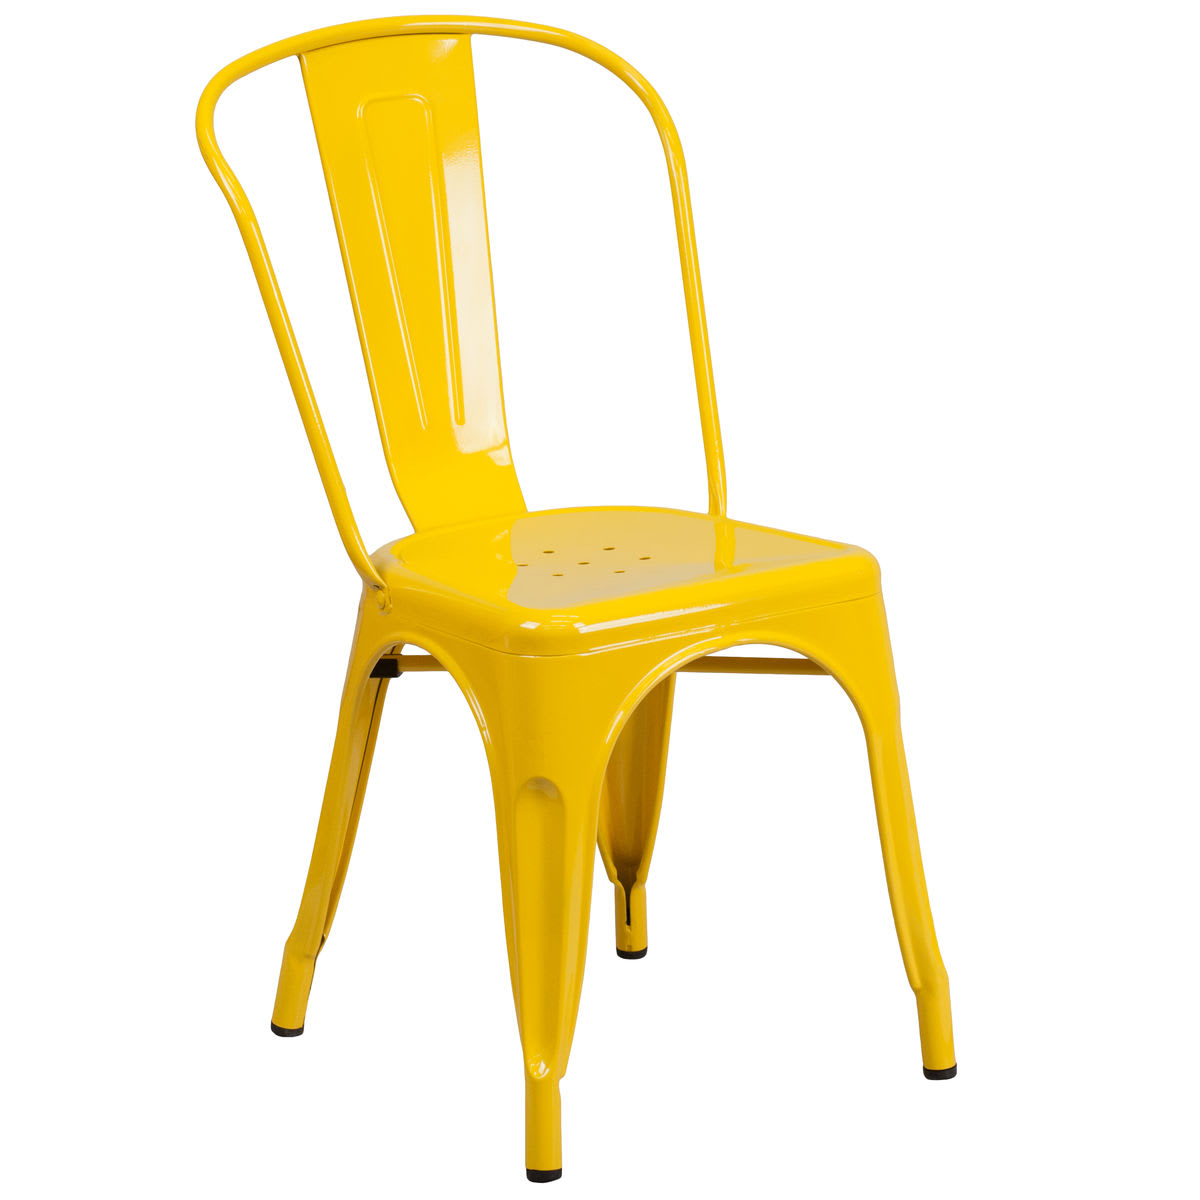 Bistro Style Metal Chair in Yellow Finish